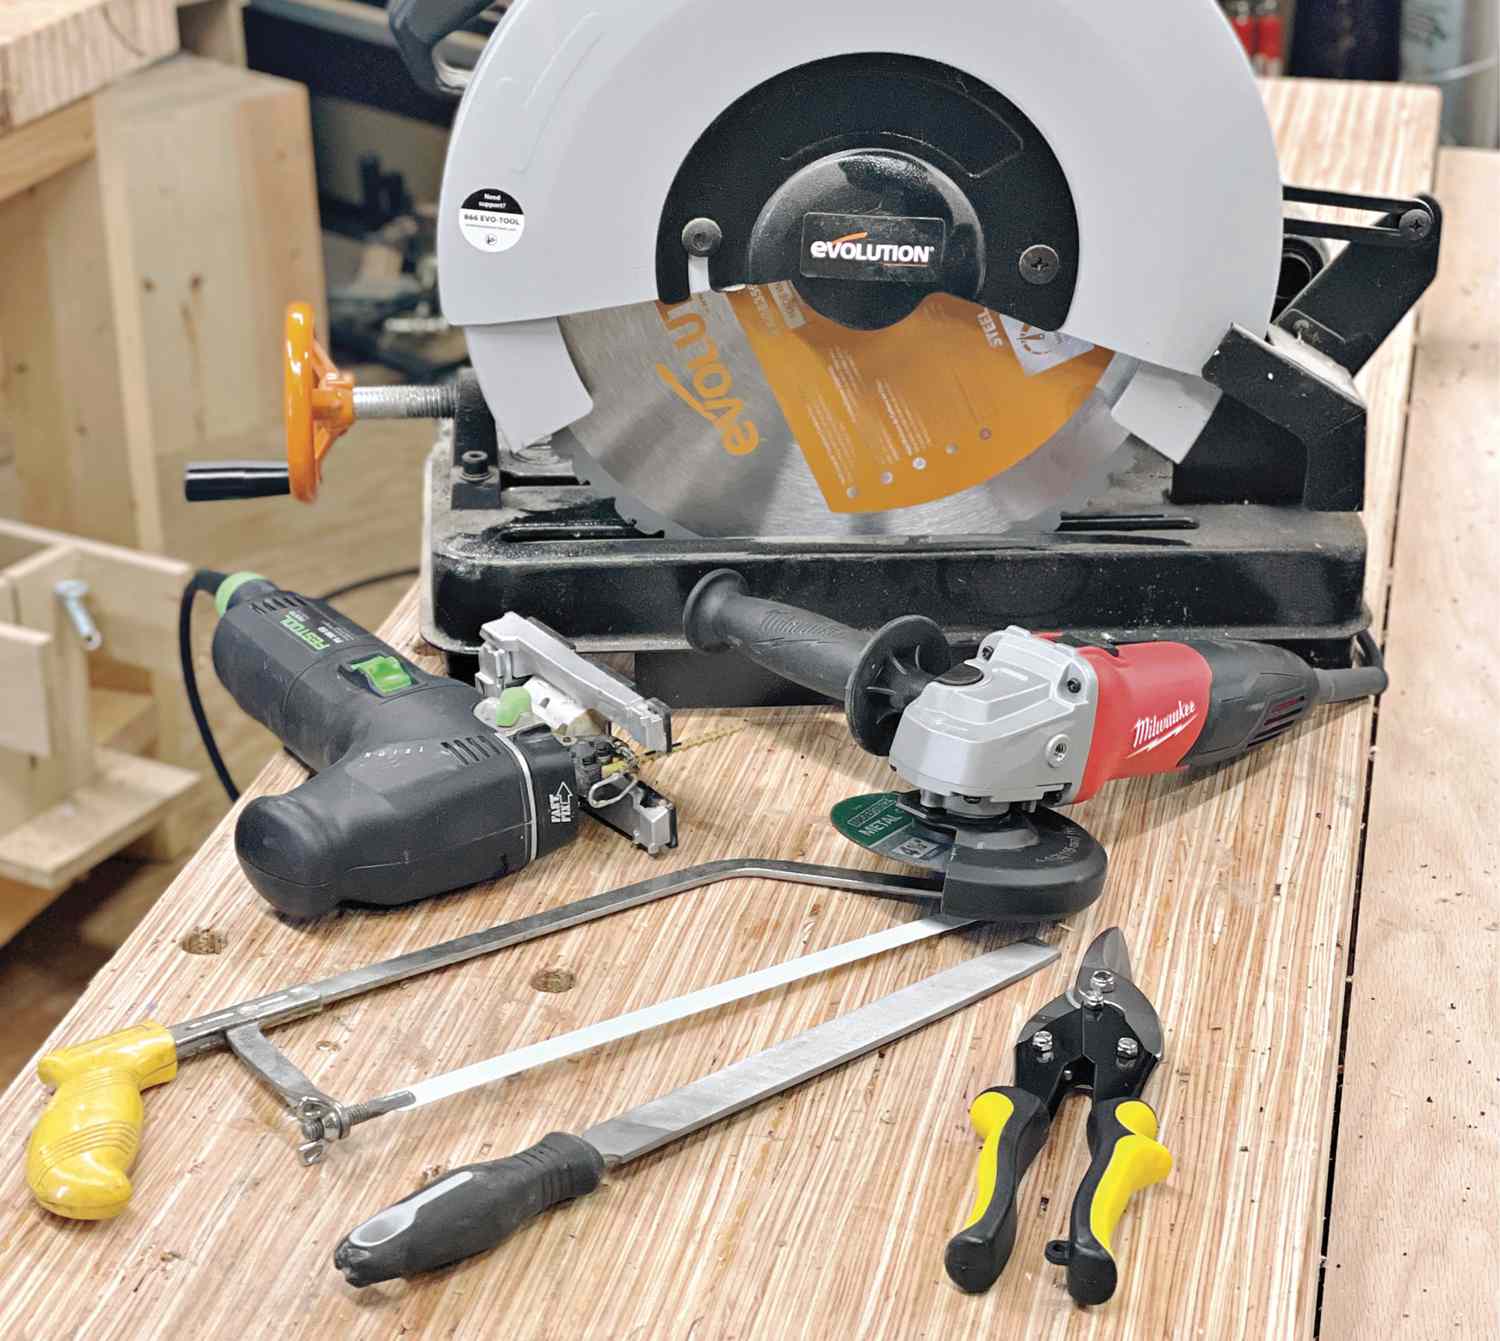 Photo of shop tools uses in metalworking